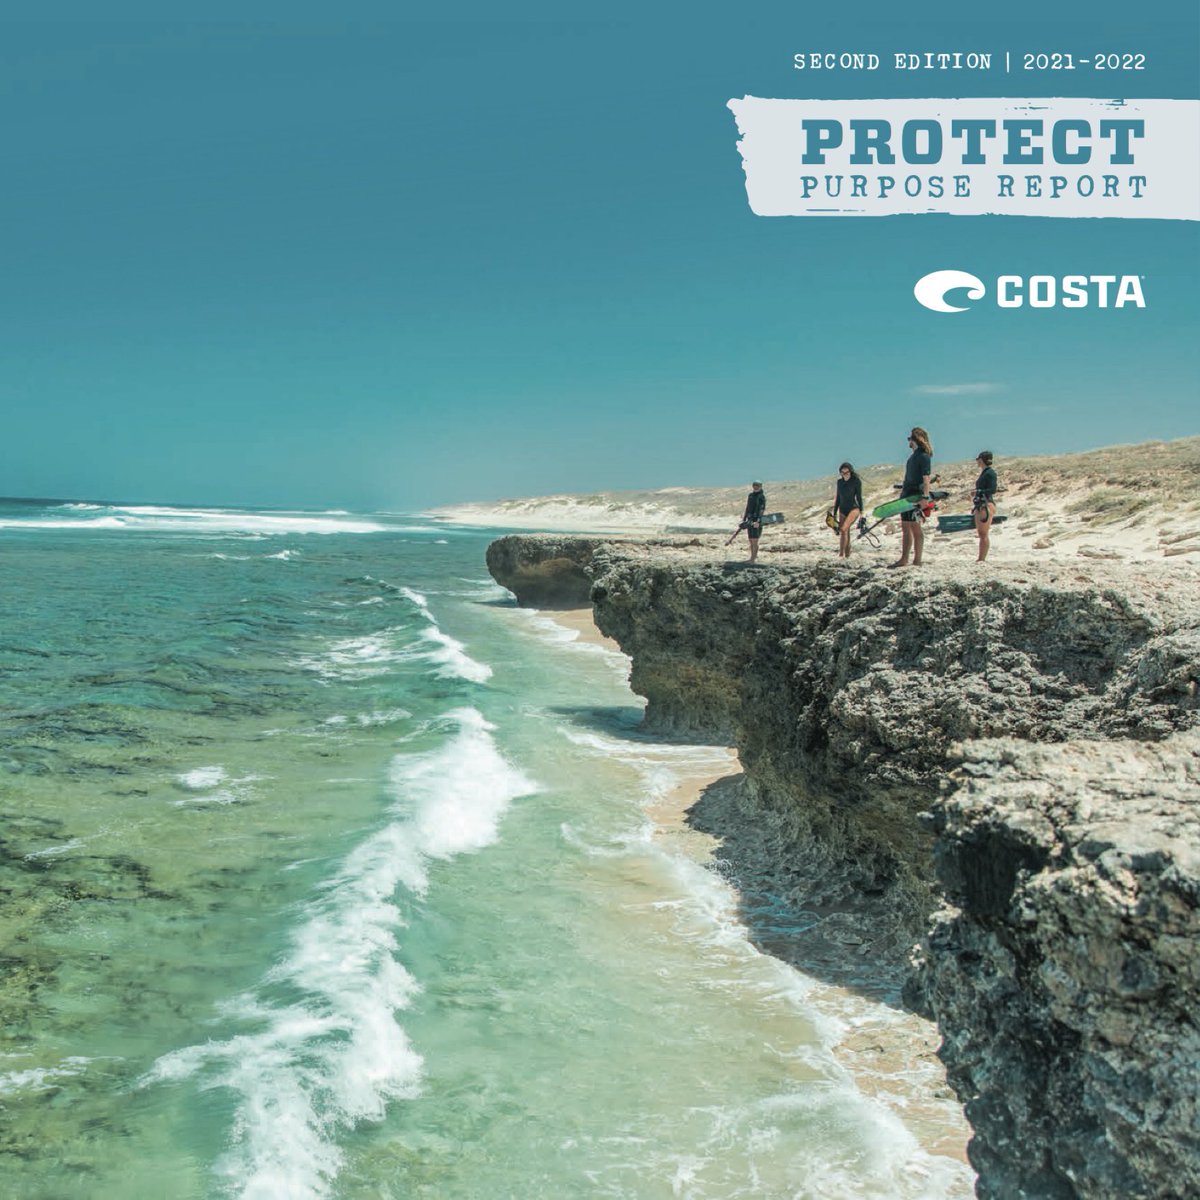 Our Second Edition: Protect Report is the highlight of our commitment, together with our community, to preserve valuable watery resources and protect the life within.   Tap the link in bio to read the report and learn more about our commitment to #ProtectWhatsOutThere.